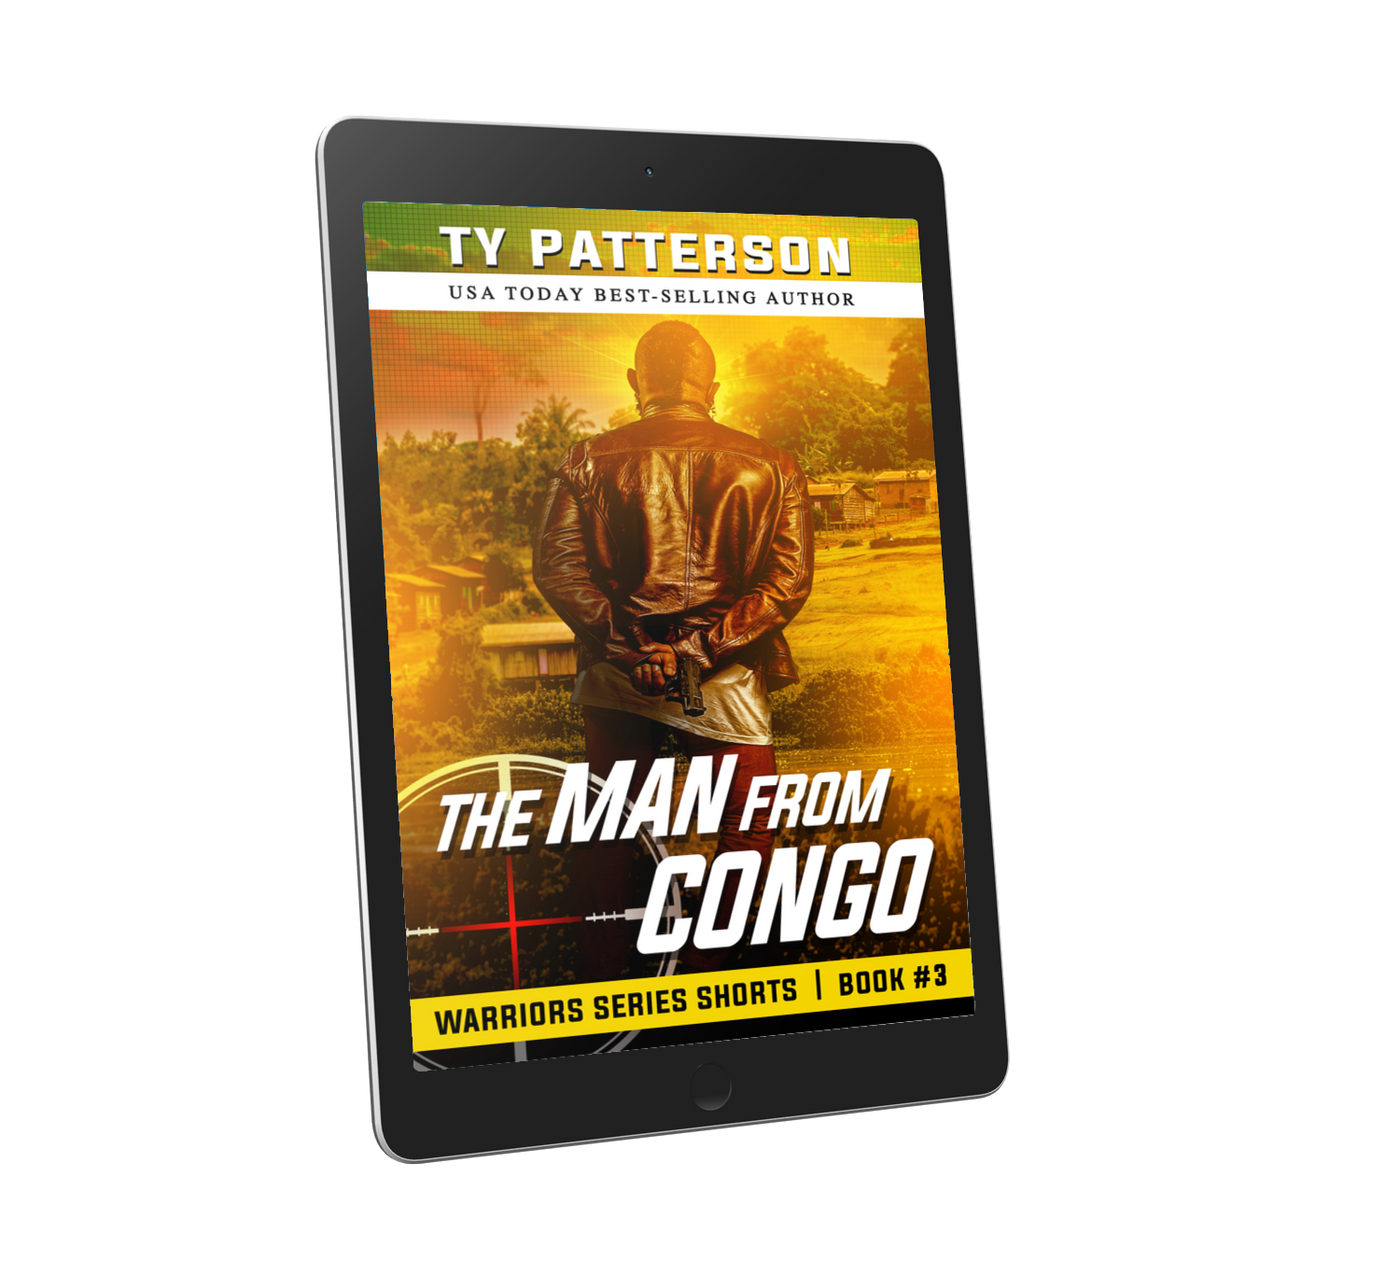 The Man from Congo